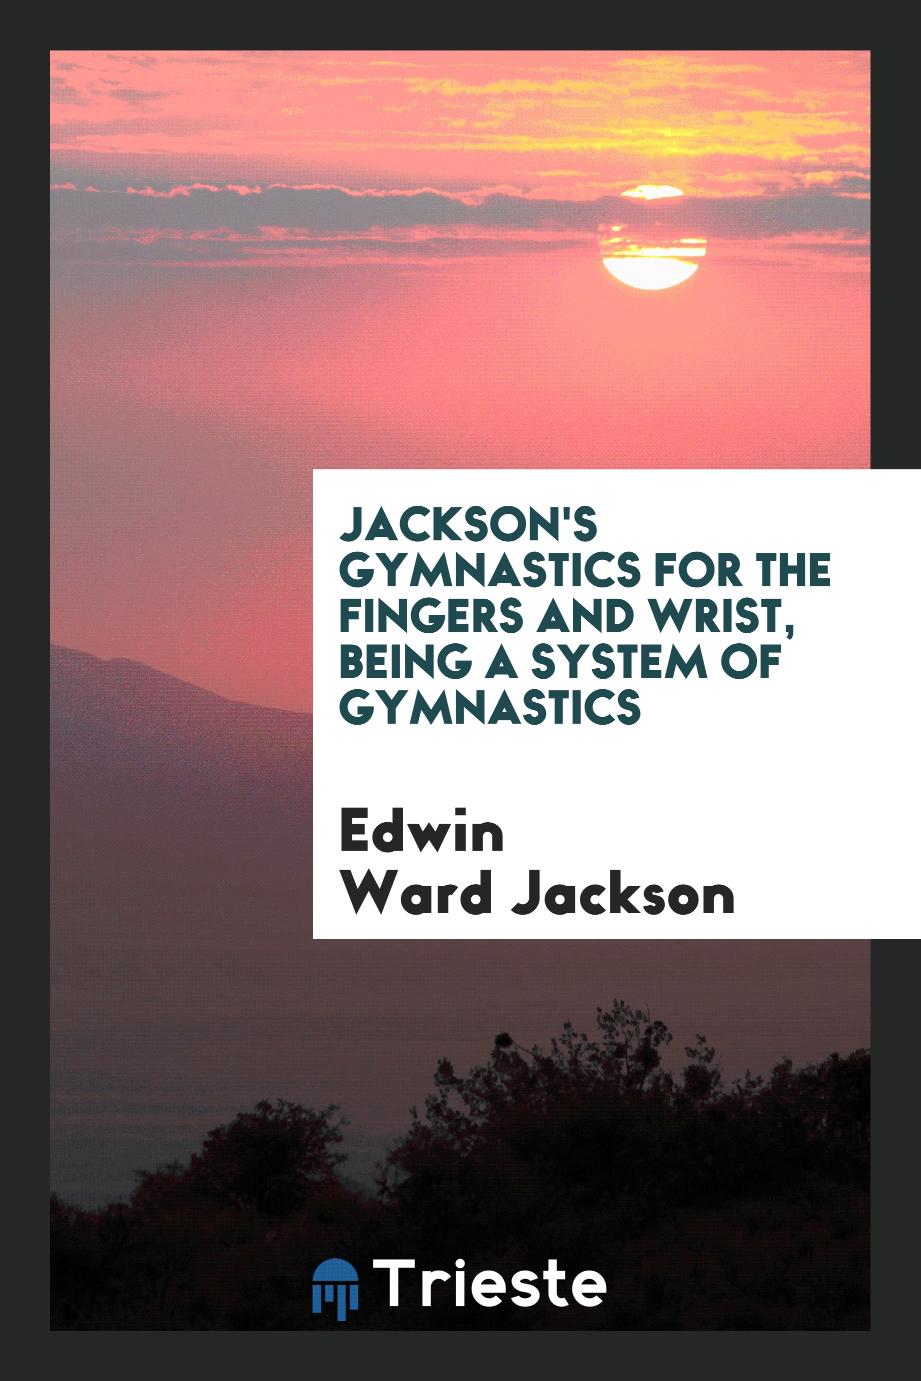 Jackson's Gymnastics for the Fingers and Wrist, Being a System of Gymnastics